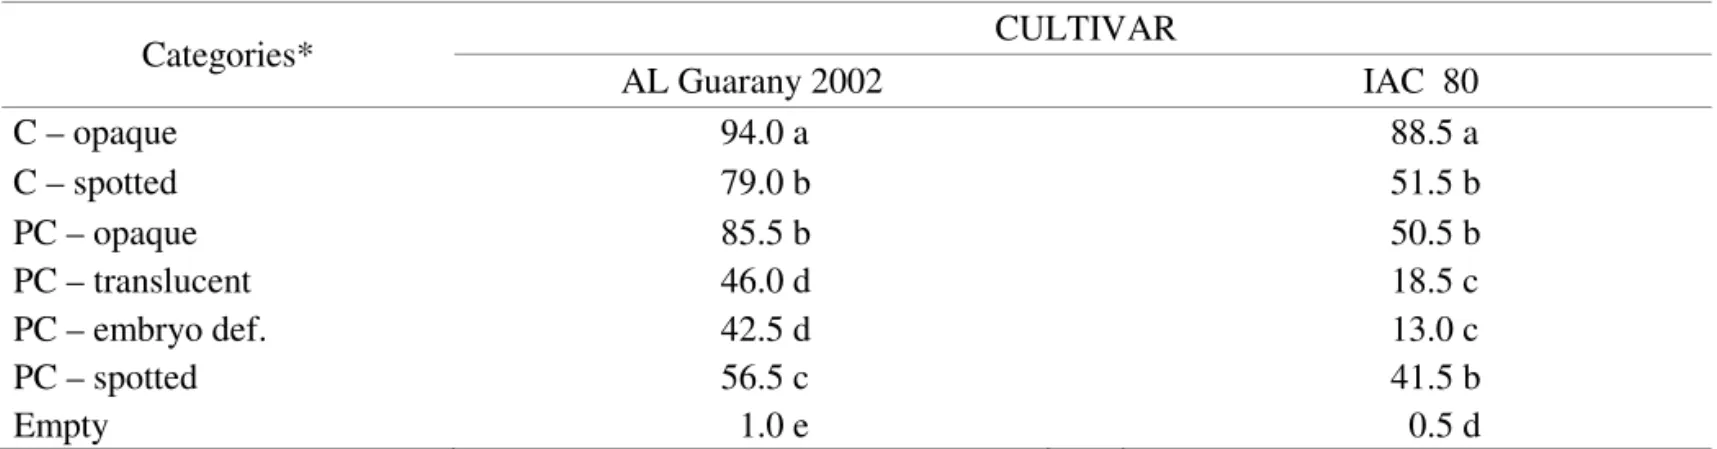 TABLE 1. Castor bean seed germination (%) of the AL Guarany 2002 and IAC 80 cultivars, *classified as full (C) and  partially full (PC)